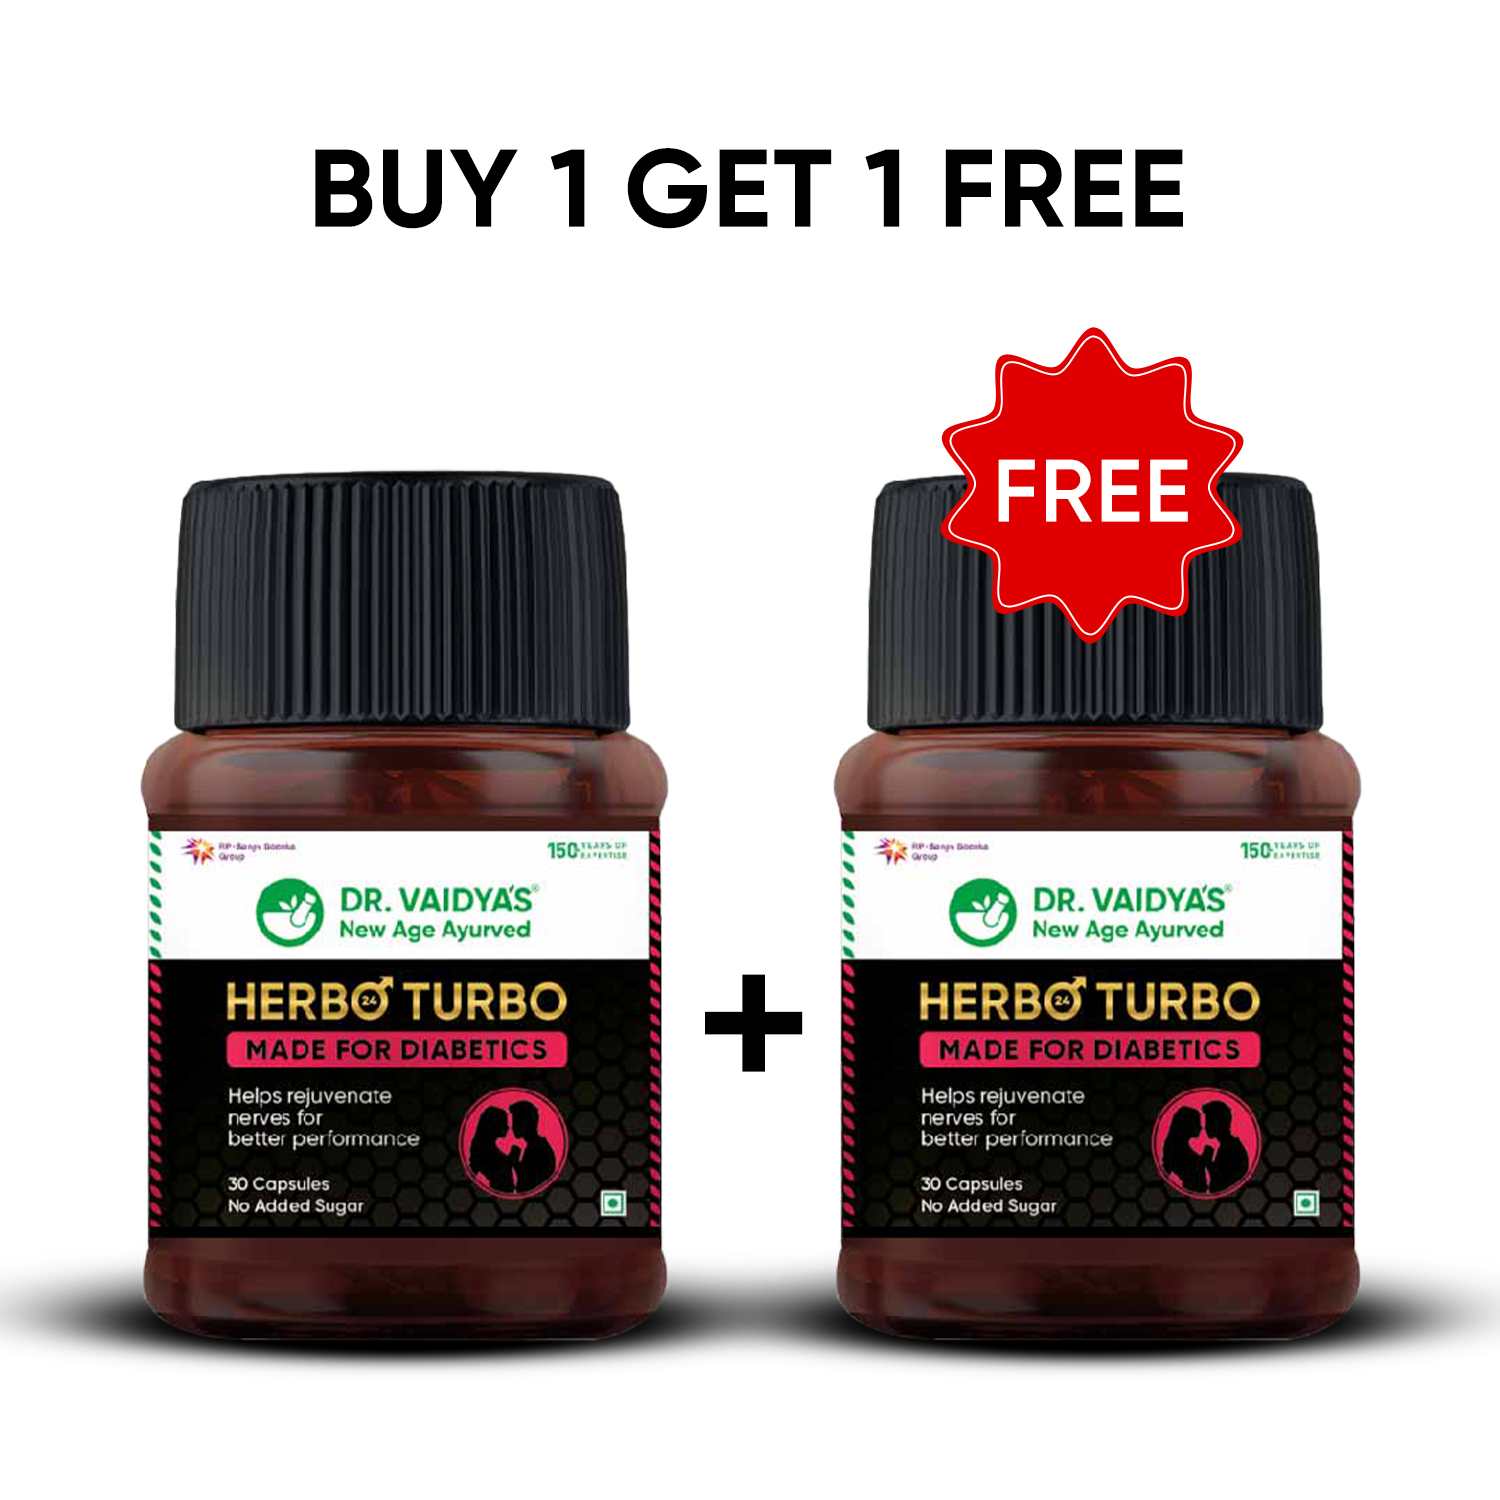 Herbo24Turbo: For Diabetes-Related Performance Problems In Men - Buy 1 Get 1 FREE